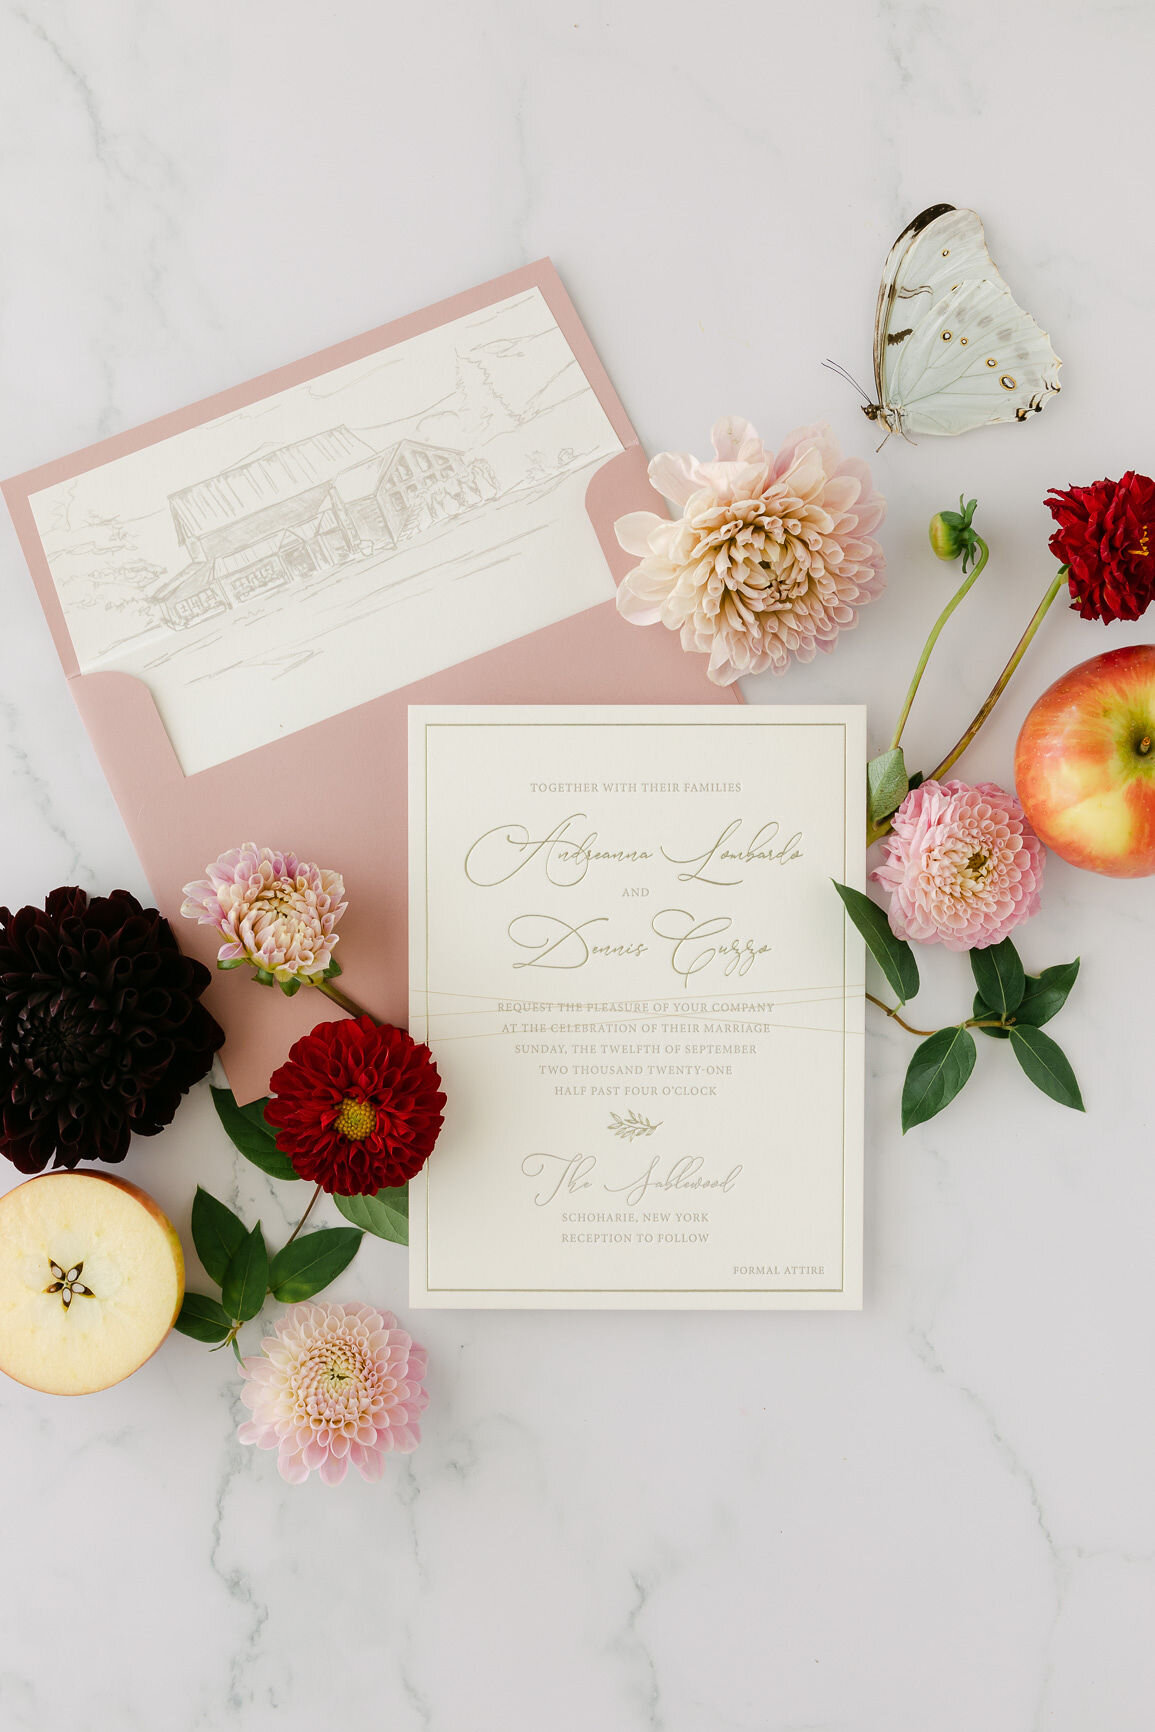 Custom dusty rose wedding invitation with barn illustration for The Sablewood in Upstate New York